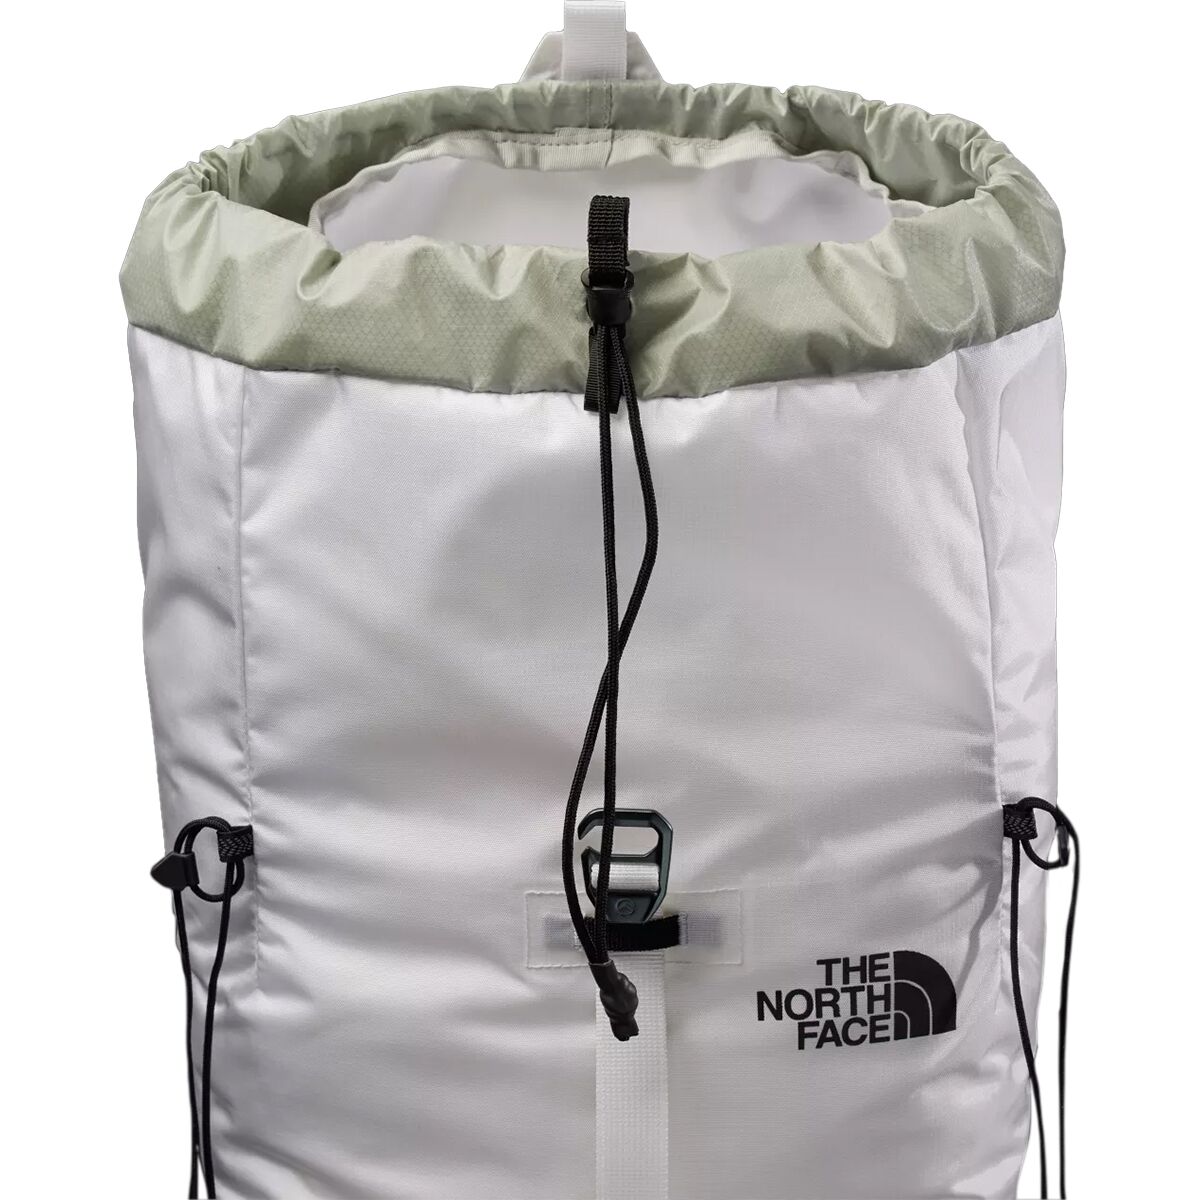 The North Face Verto 27L Backpack - Hike & Camp